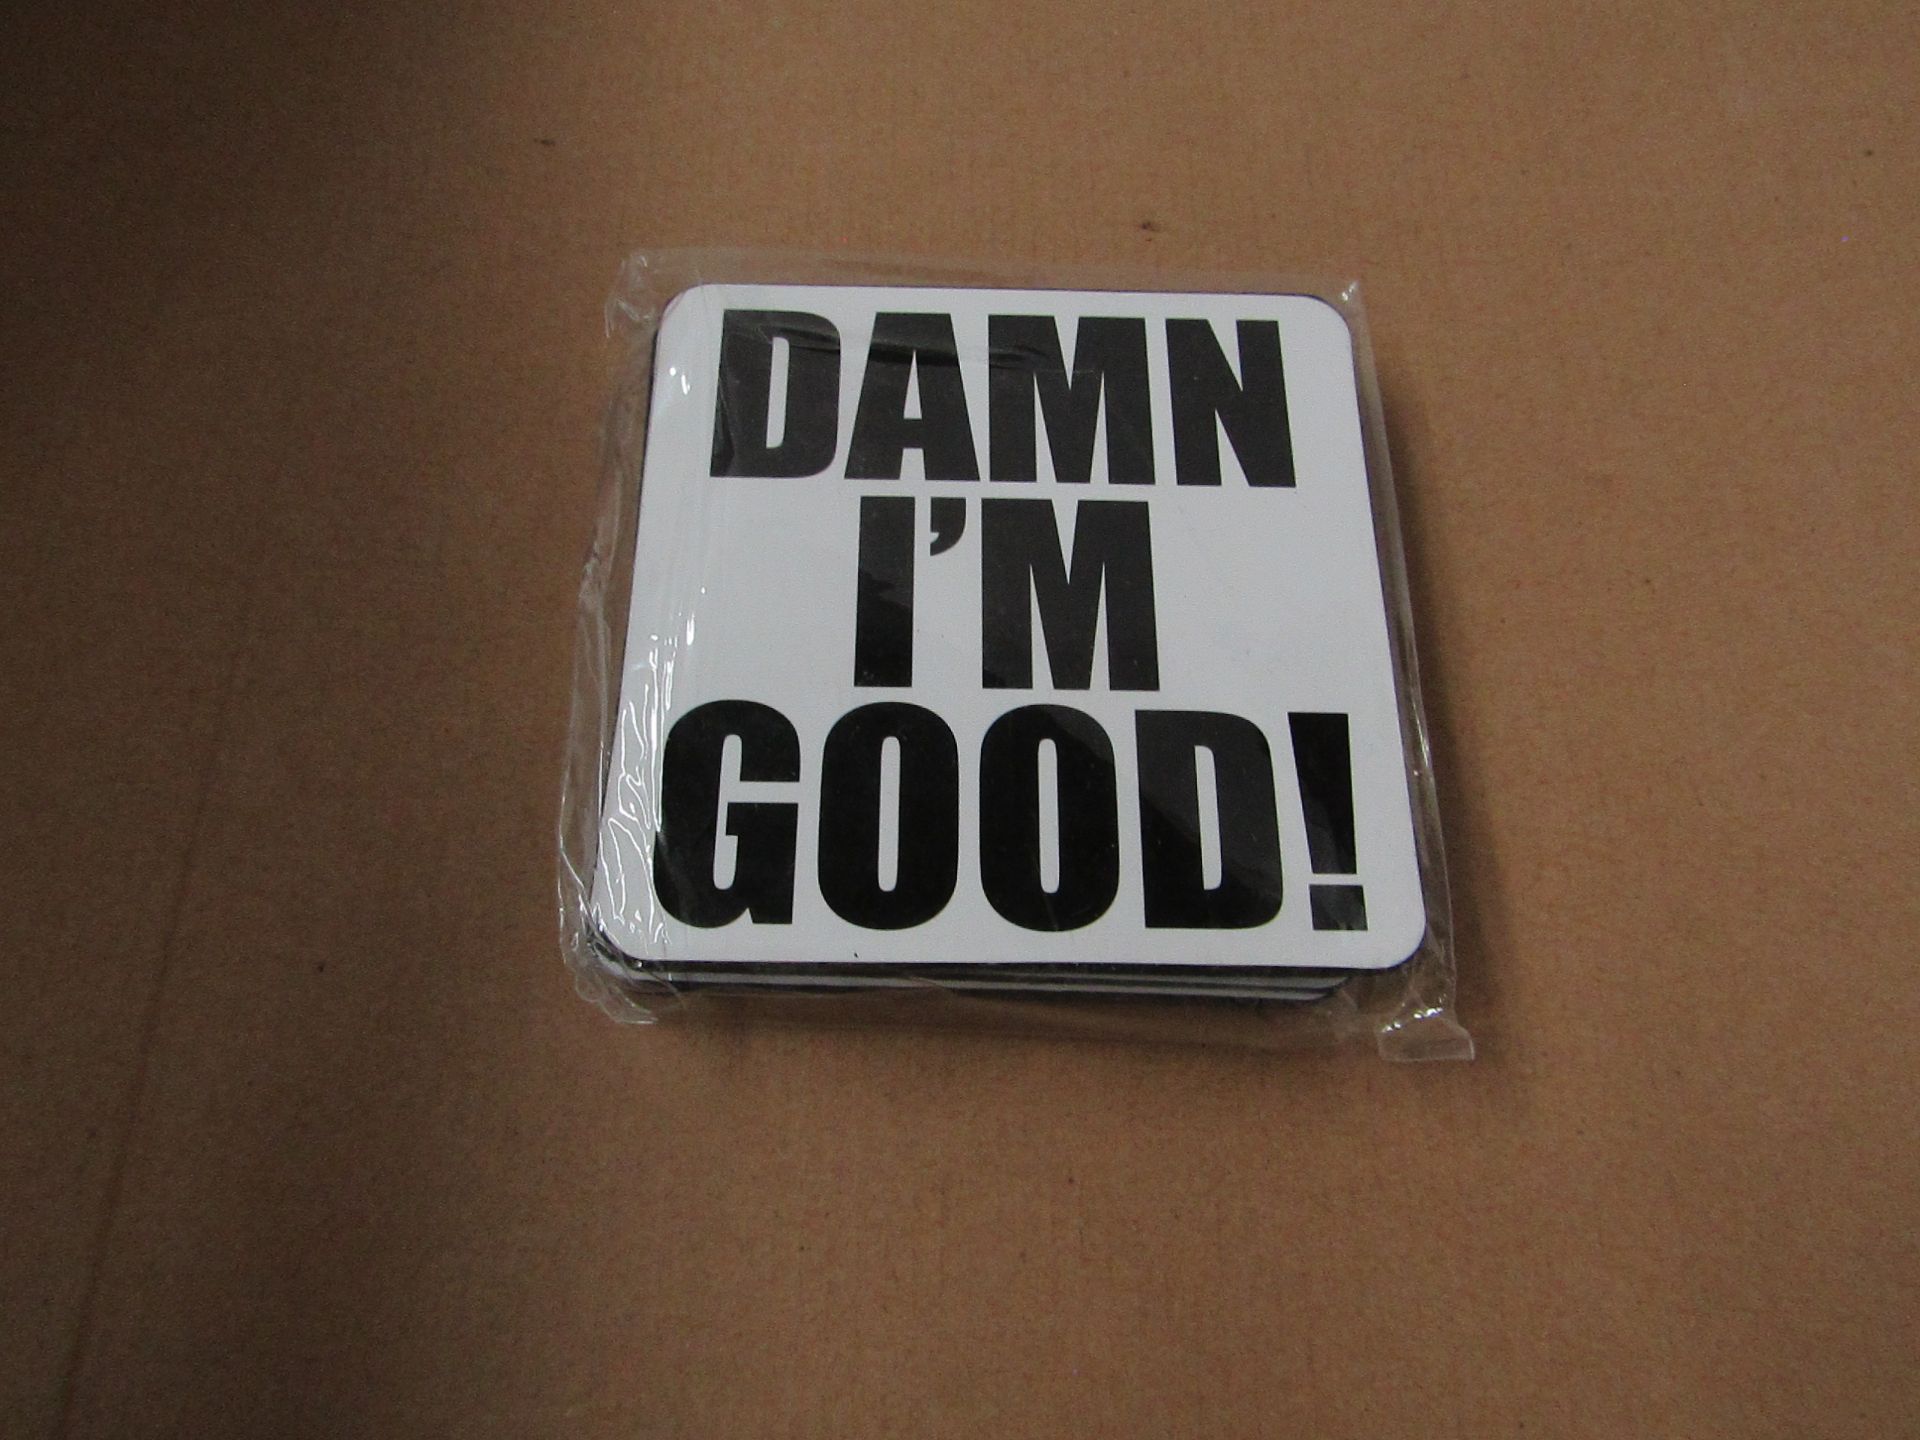 5x Packs Being : Spencer & Fleetwood - " DAMN I'M GOOD! " Branded Coaster Sets ( 6 Coasters Per Pack